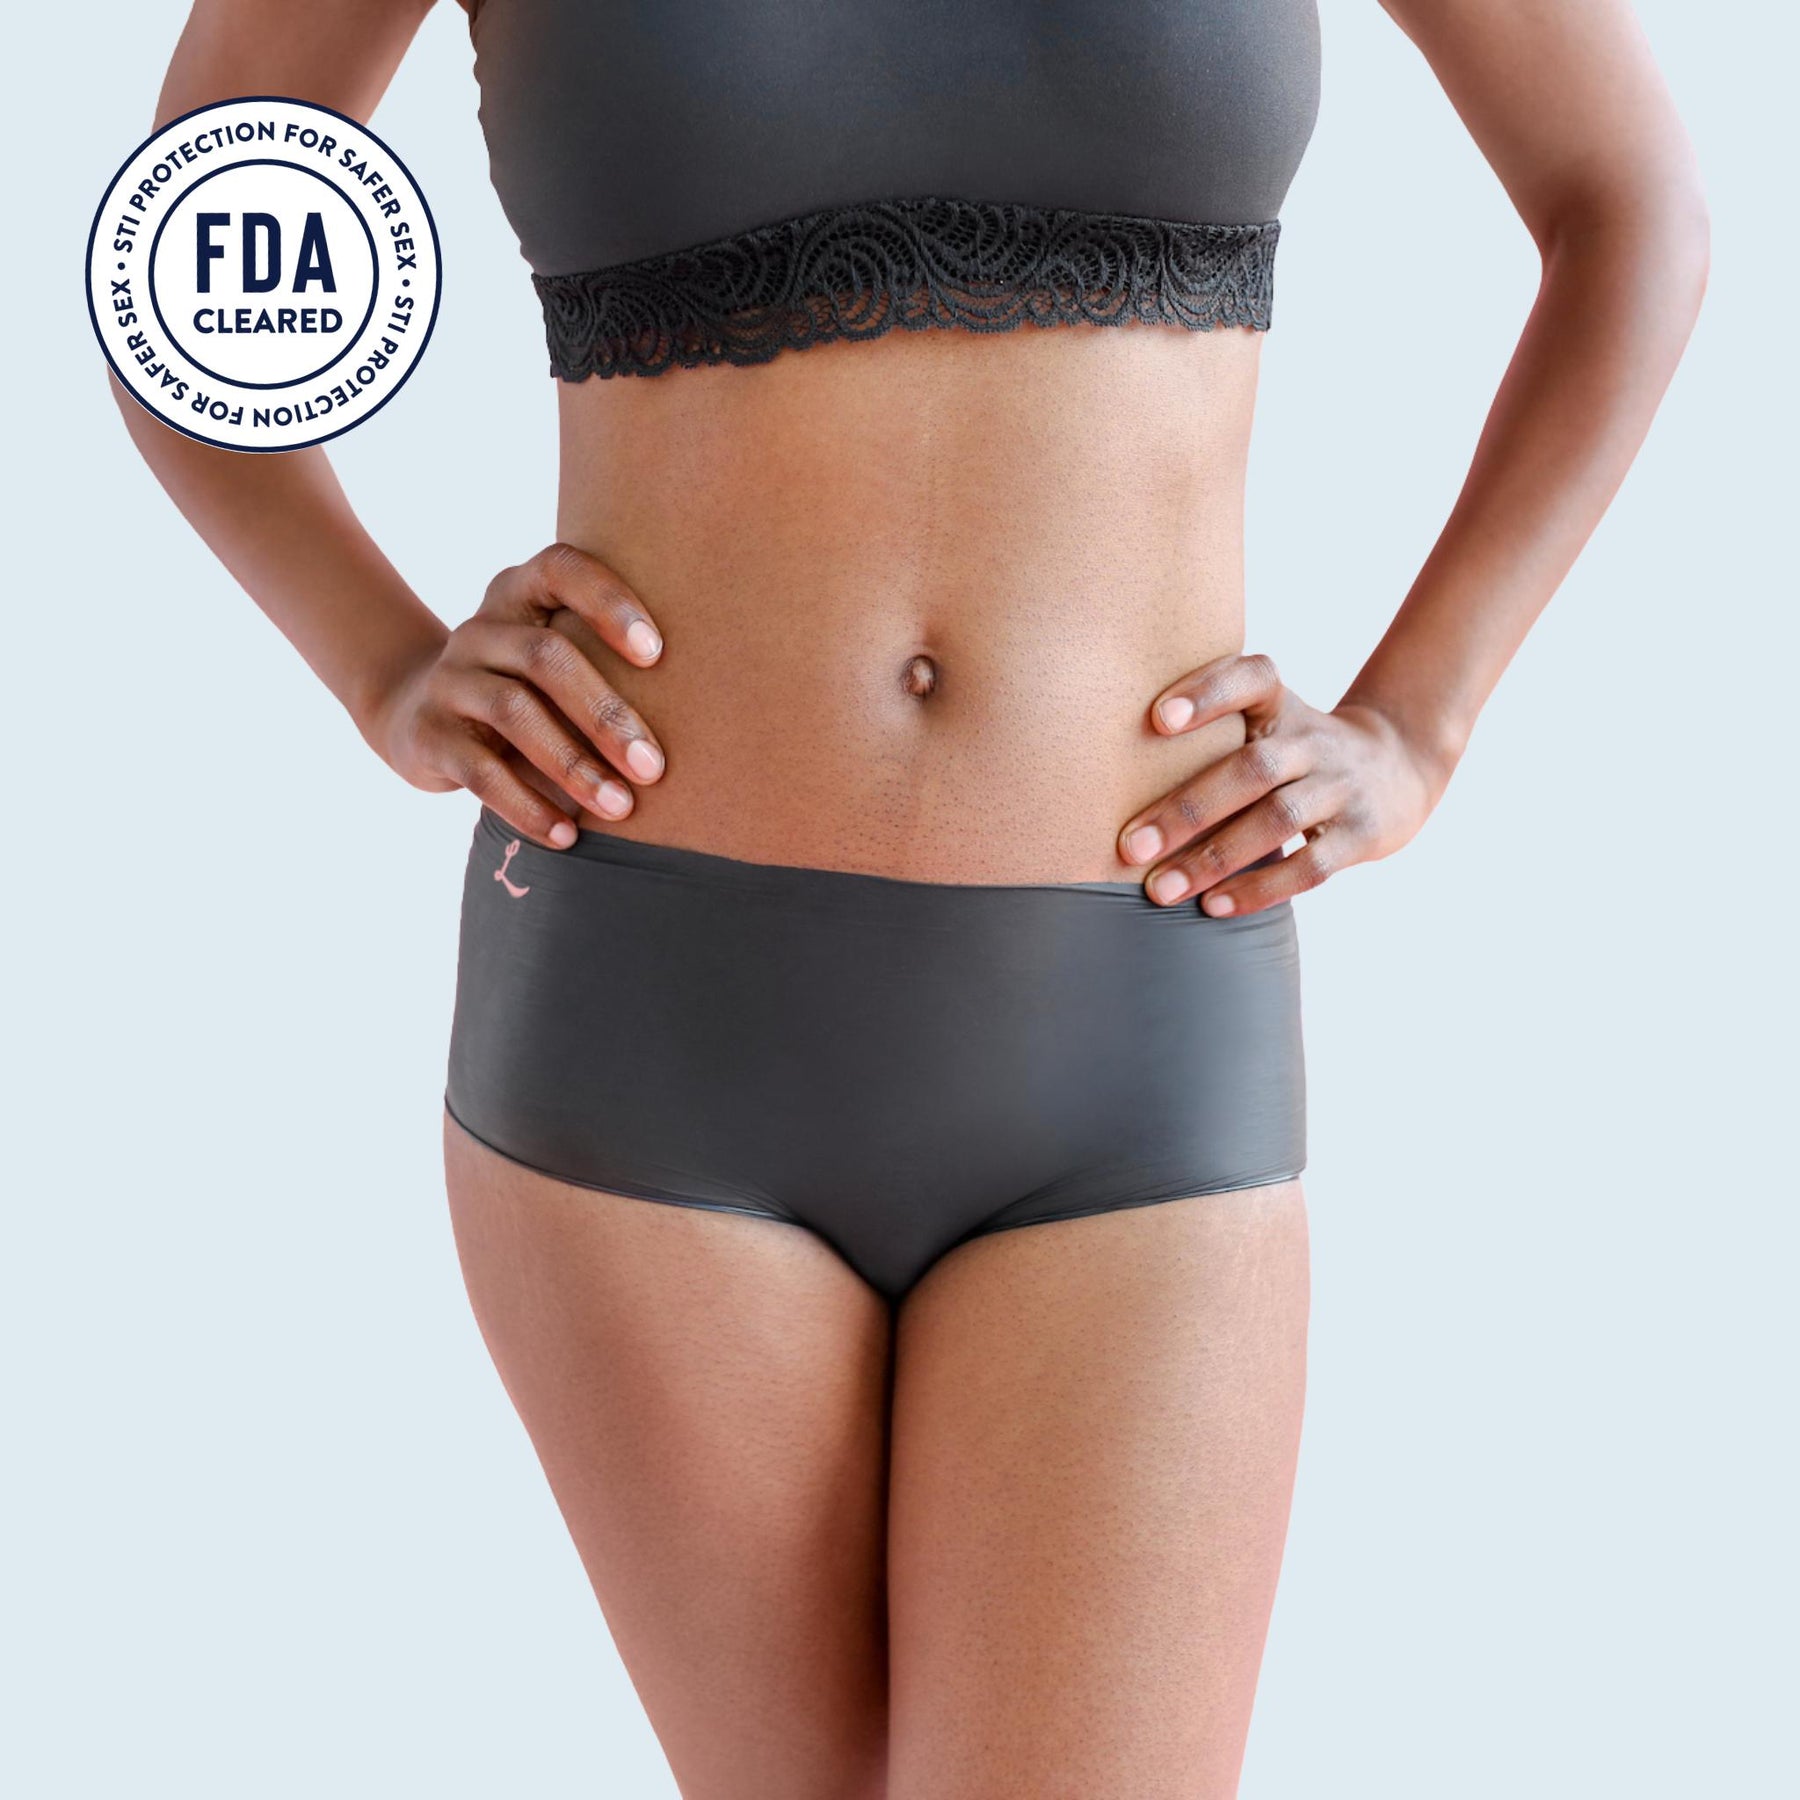 Lorals model Gladys demonstrates the front view of Protection Undies in Black Shorties